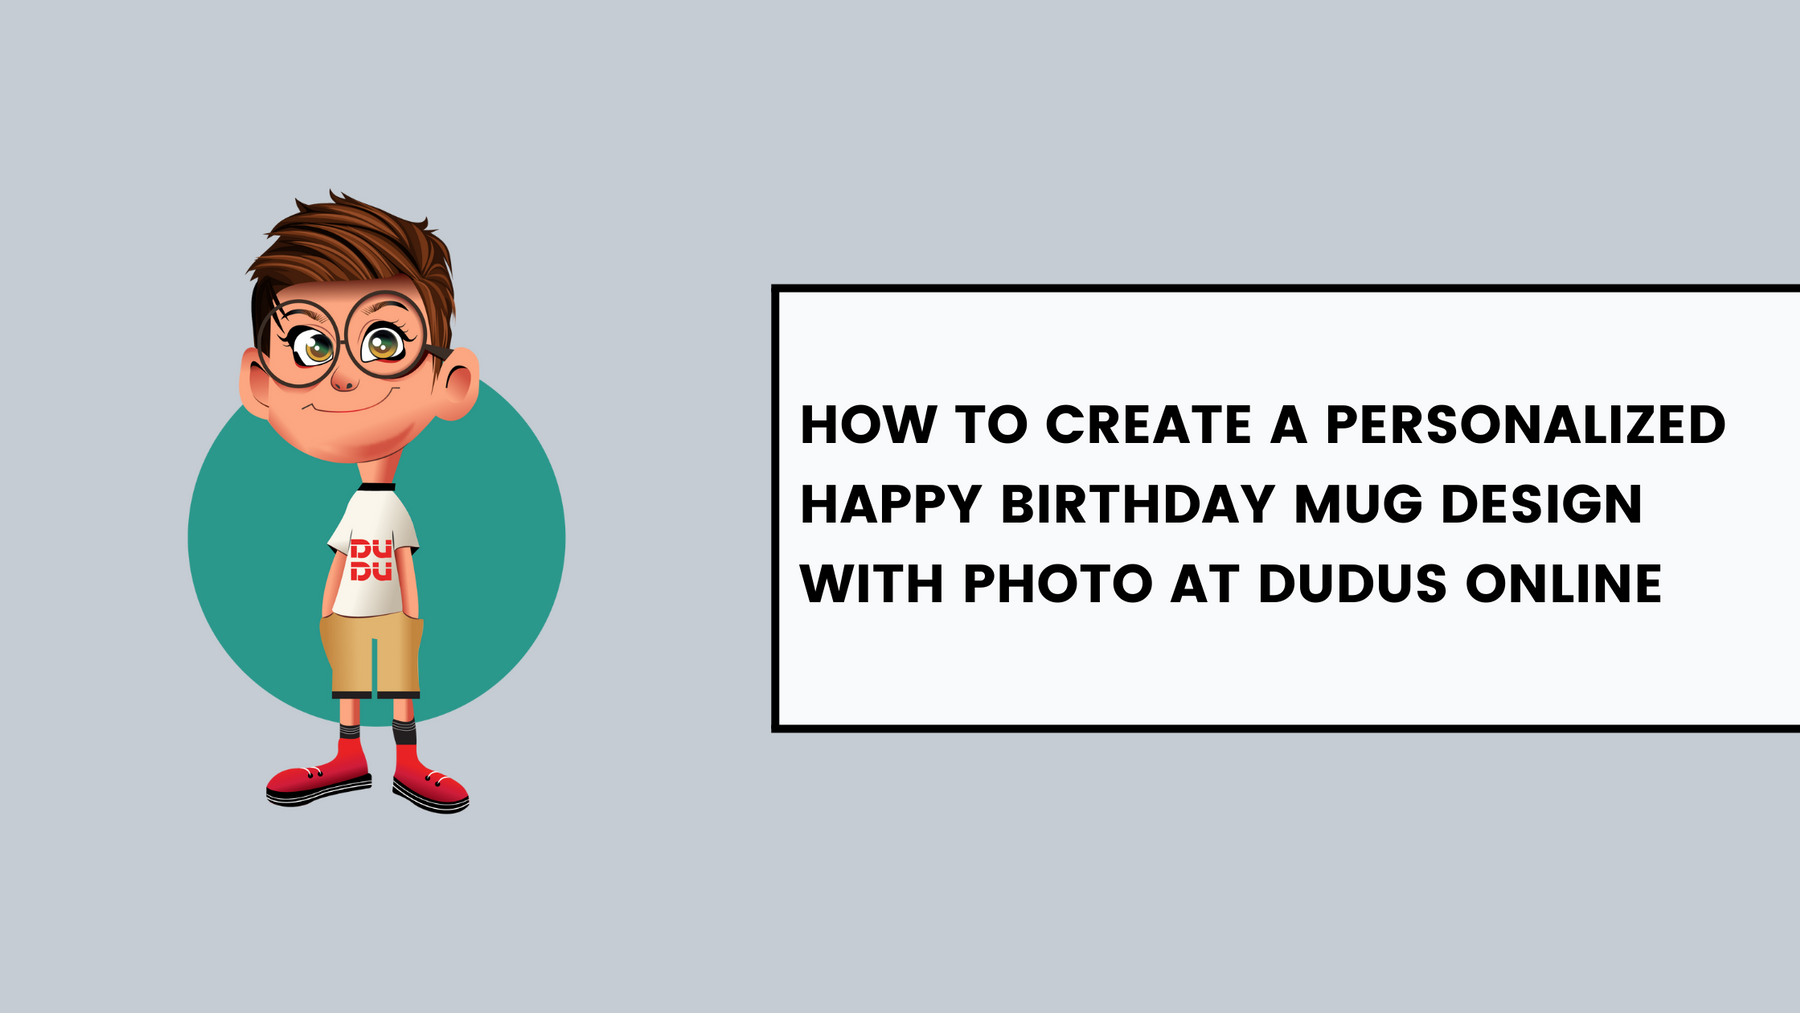 How to Create a Personalized Happy Birthday Mug Design with Photo at Dudus Online